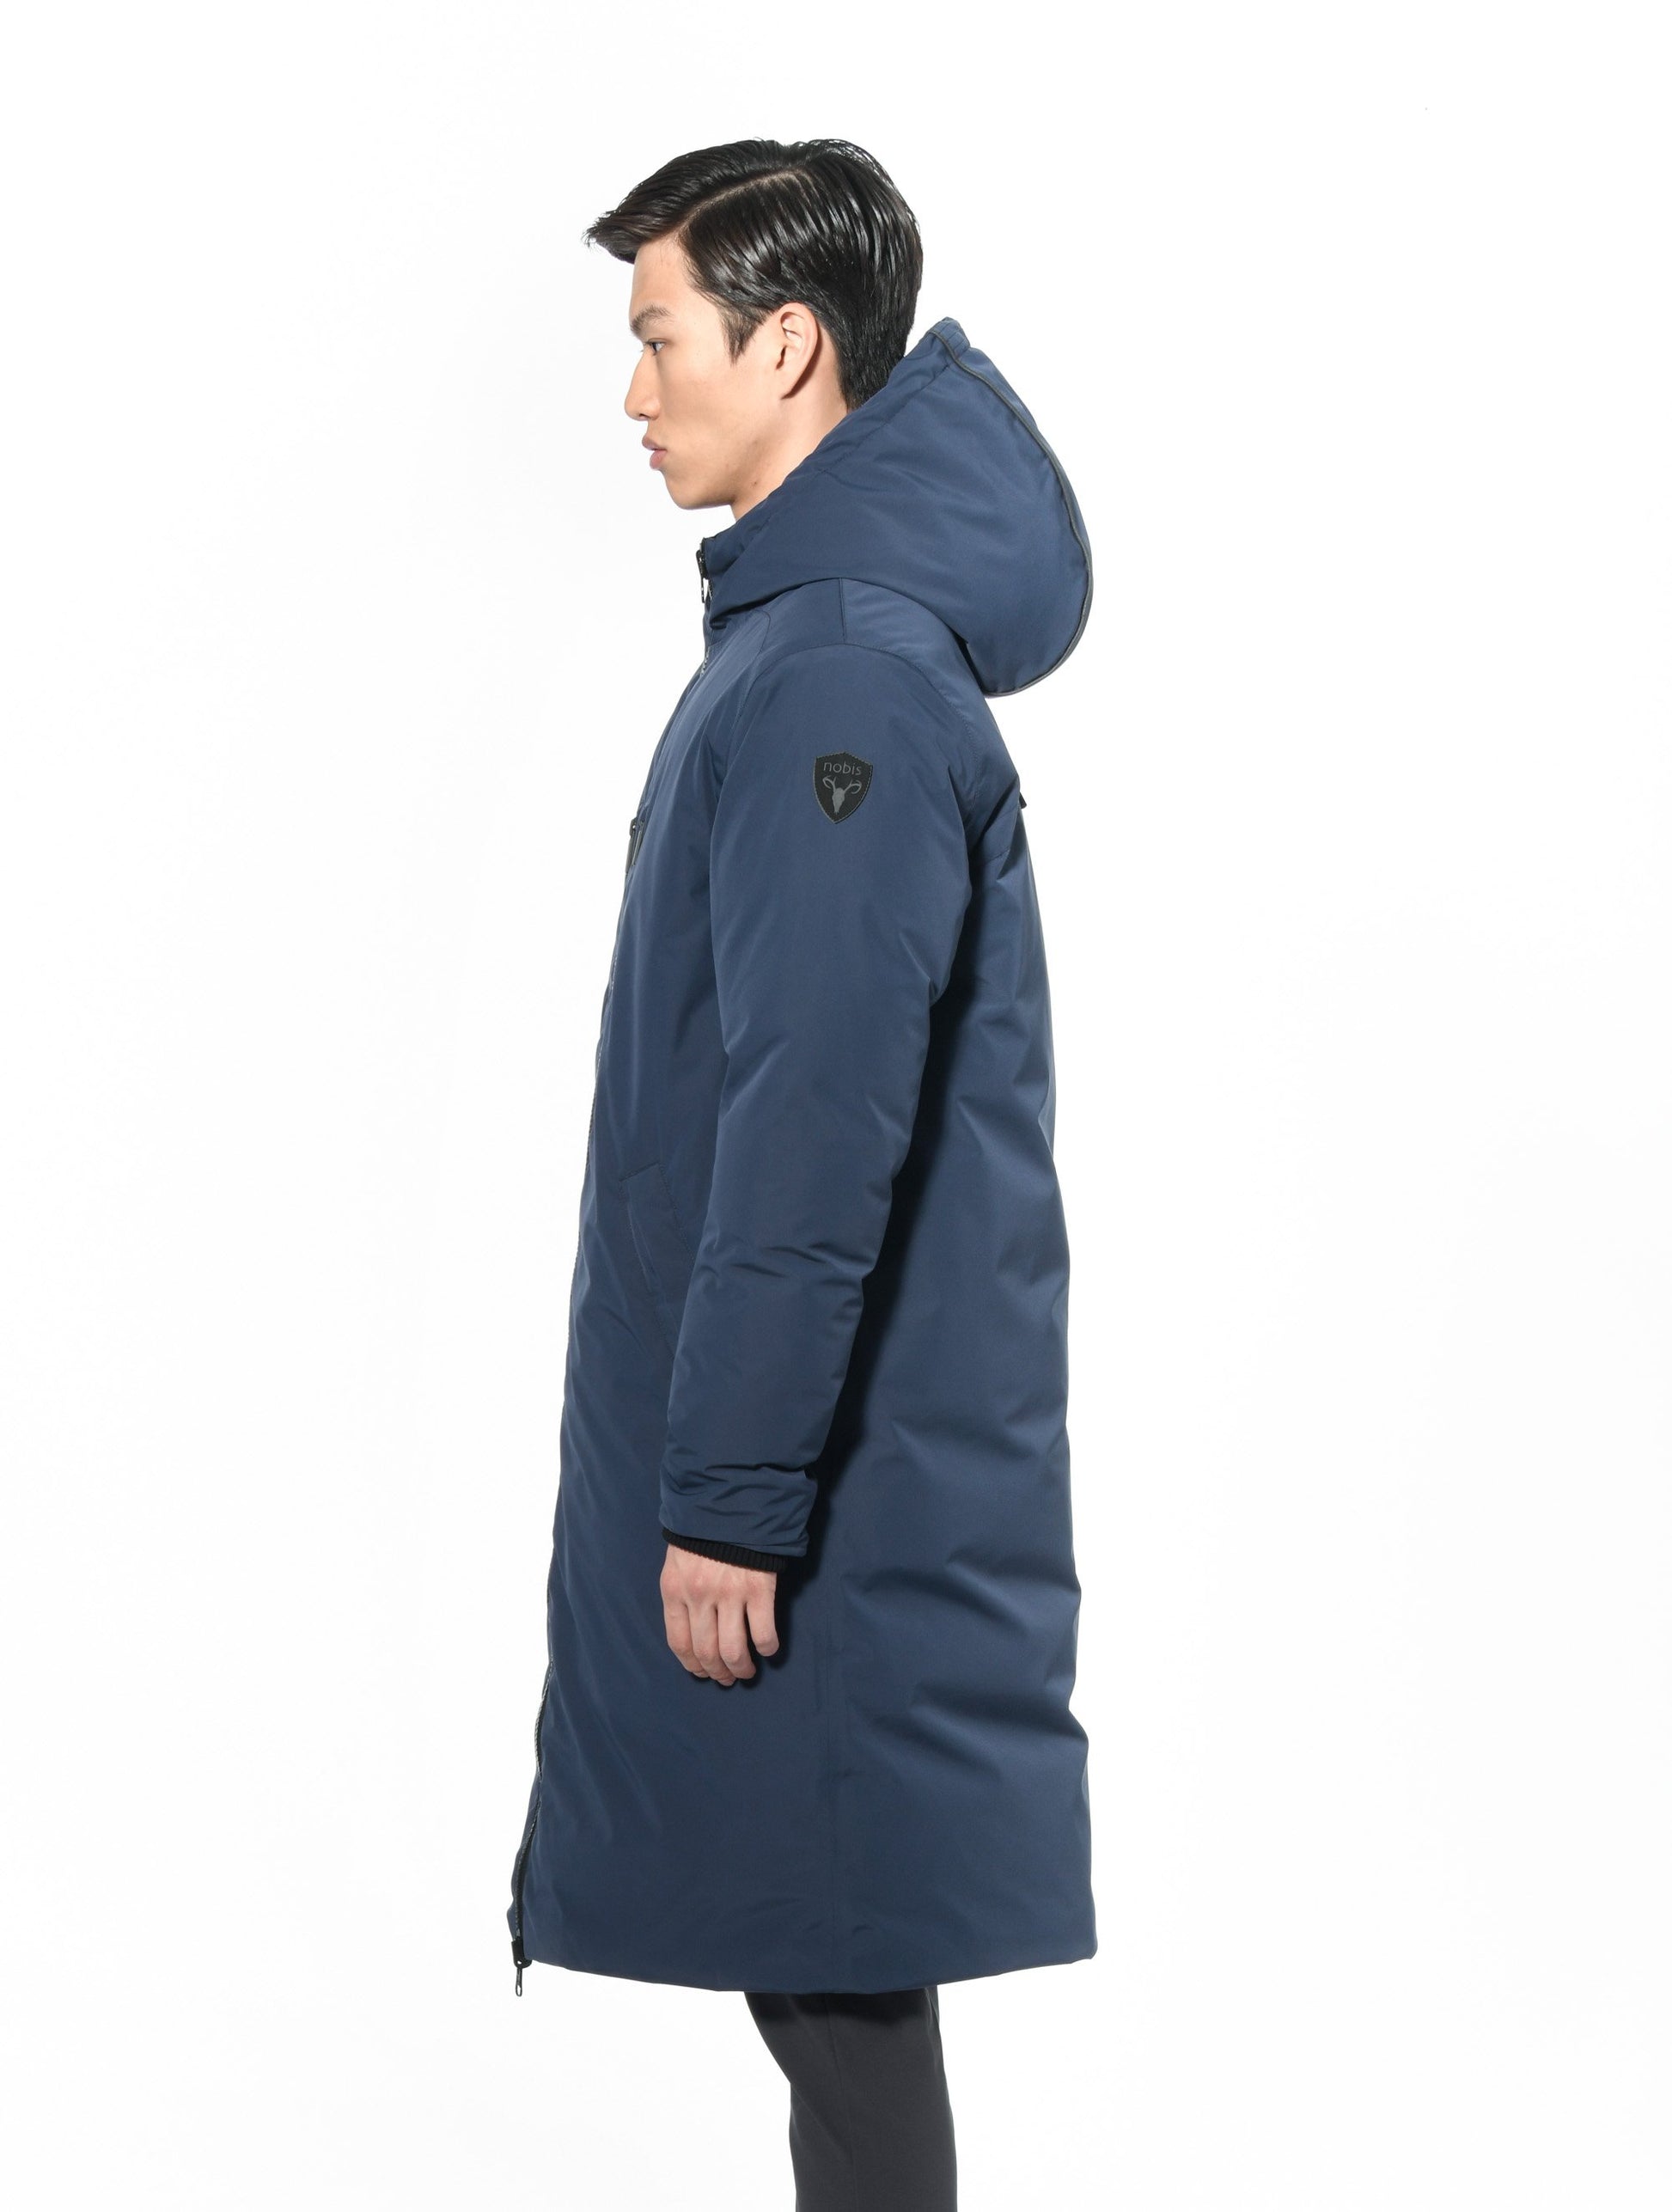 Men's knee length reversible down-filled parka with non-removable hood in Marine